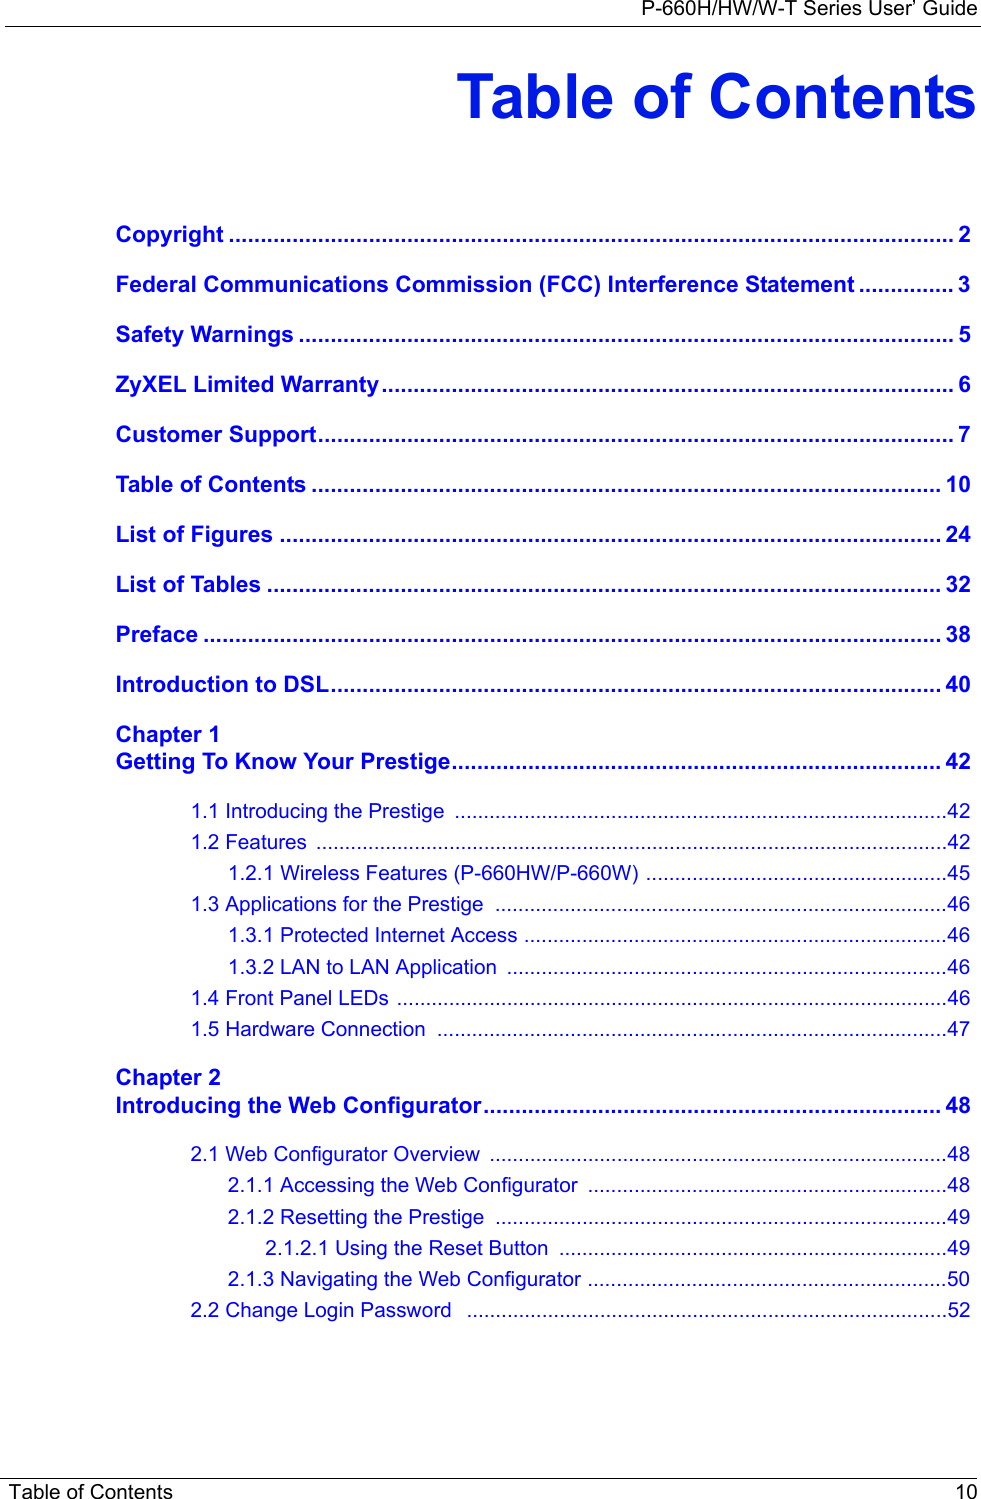 P-660H/HW/W-T Series User’ GuideTable of Contents 10Table of ContentsCopyright .................................................................................................................. 2Federal Communications Commission (FCC) Interference Statement ............... 3Safety Warnings ....................................................................................................... 5ZyXEL Limited Warranty.......................................................................................... 6Customer Support.................................................................................................... 7Table of Contents ................................................................................................... 10List of Figures ........................................................................................................ 24List of Tables .......................................................................................................... 32Preface .................................................................................................................... 38Introduction to DSL................................................................................................ 40Chapter 1Getting To Know Your Prestige............................................................................. 421.1 Introducing the Prestige  .....................................................................................421.2 Features  .............................................................................................................421.2.1 Wireless Features (P-660HW/P-660W) ....................................................451.3 Applications for the Prestige  ..............................................................................461.3.1 Protected Internet Access .........................................................................461.3.2 LAN to LAN Application  ............................................................................461.4 Front Panel LEDs ...............................................................................................461.5 Hardware Connection  ........................................................................................47Chapter 2Introducing the Web Configurator........................................................................ 482.1 Web Configurator Overview  ...............................................................................482.1.1 Accessing the Web Configurator  ..............................................................482.1.2 Resetting the Prestige  ..............................................................................492.1.2.1 Using the Reset Button  ...................................................................492.1.3 Navigating the Web Configurator ..............................................................502.2 Change Login Password   ...................................................................................52